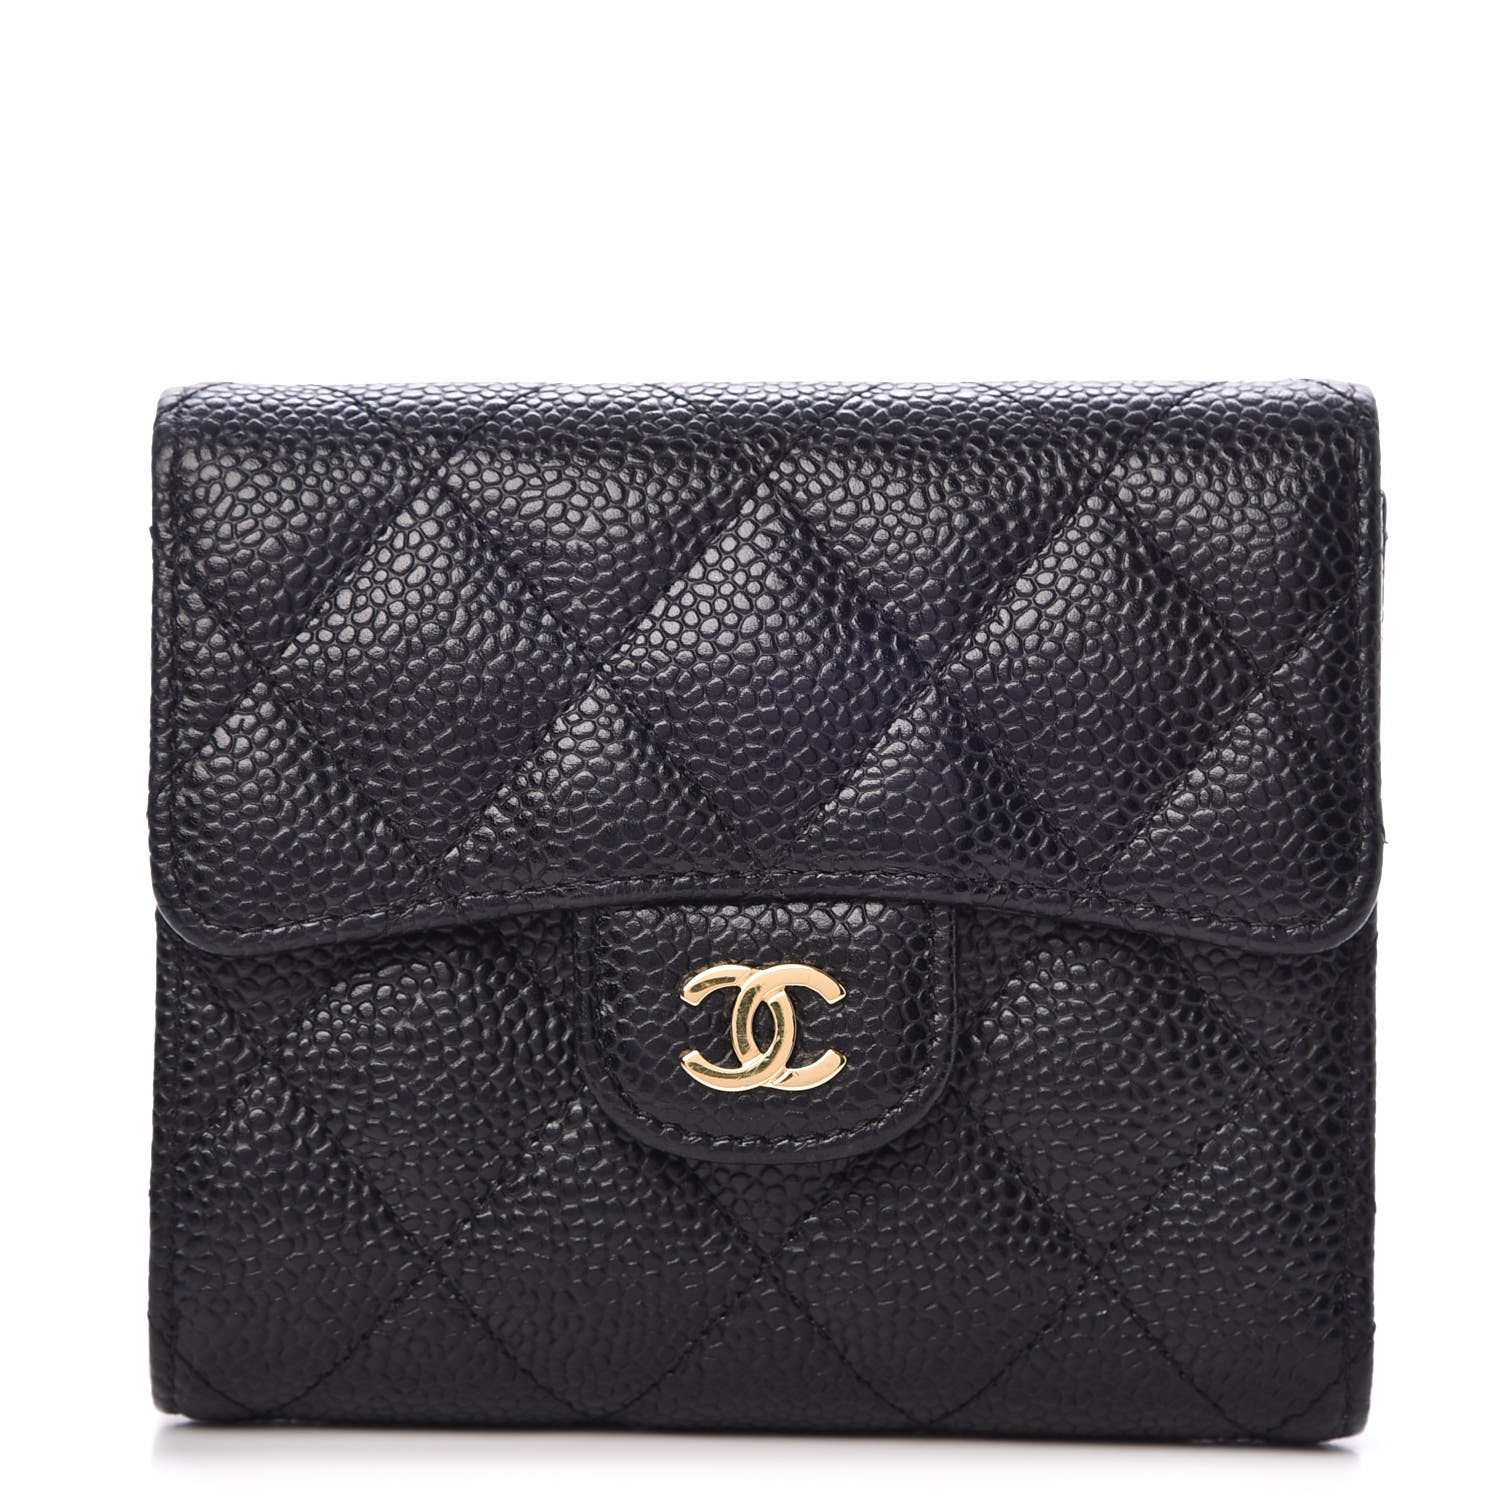 CHANEL Caviar Quilted Compact Flap Wallet Black 292948